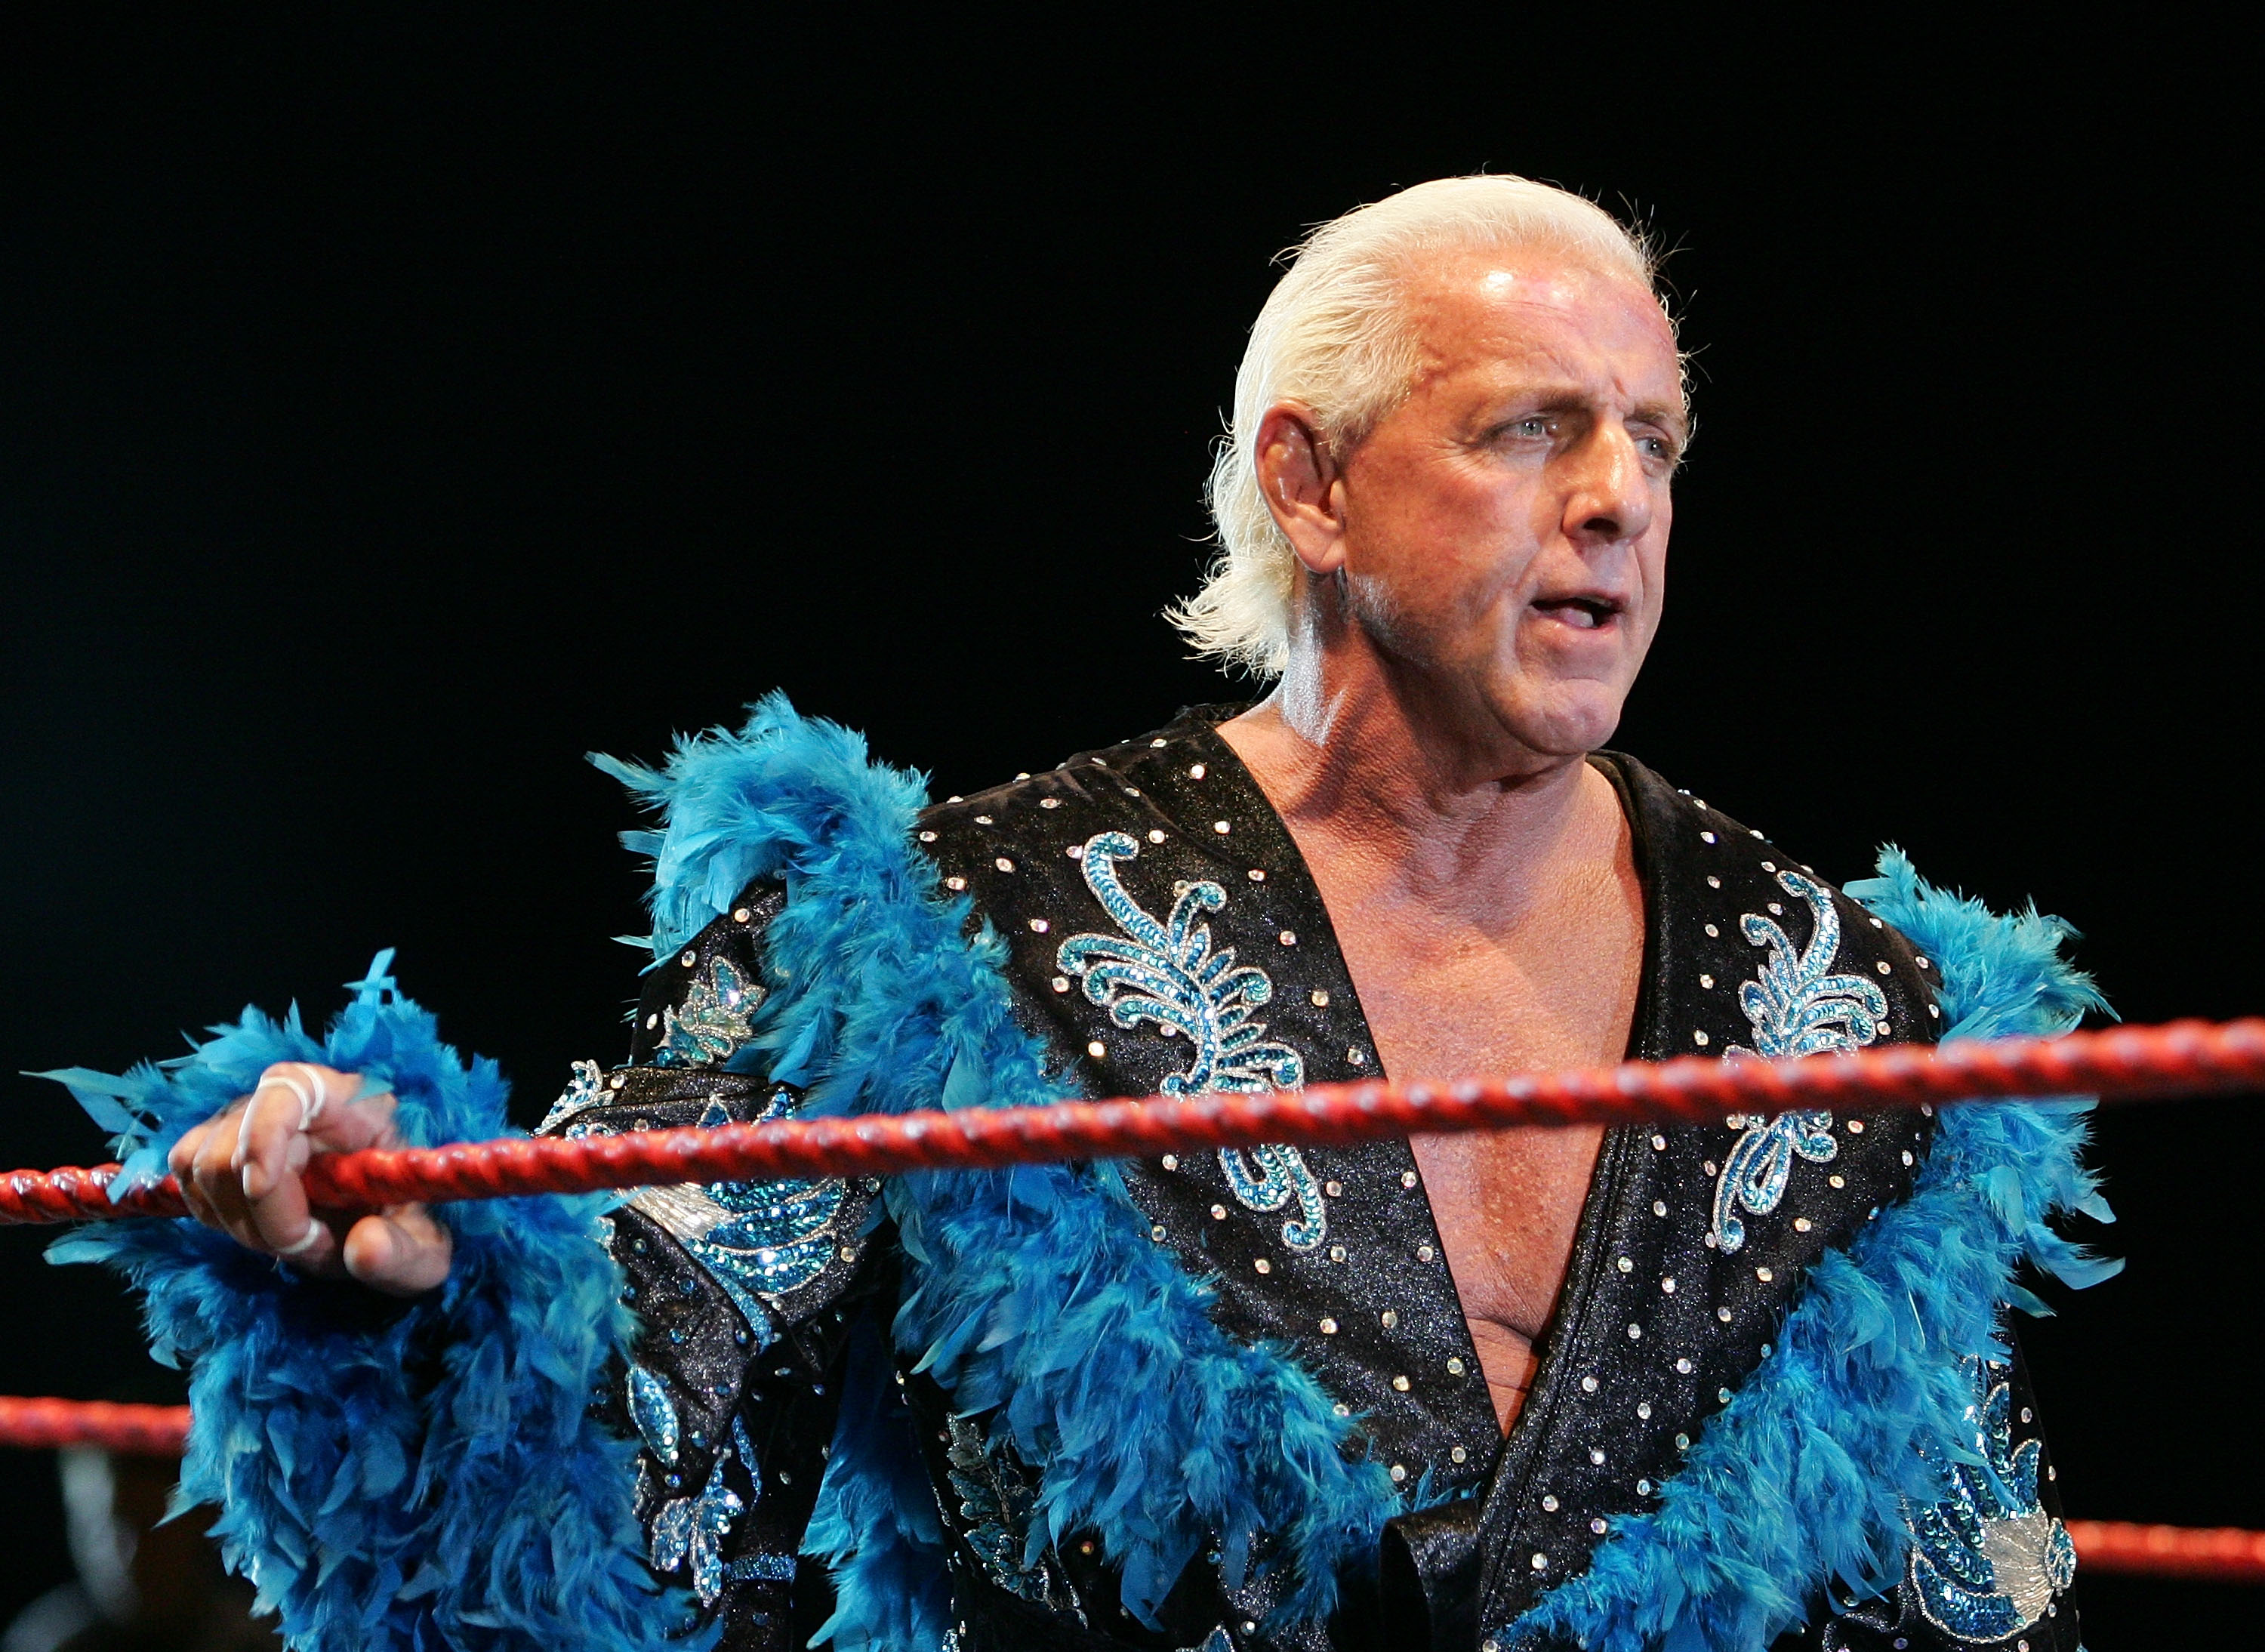 Ric Flair - wide 4